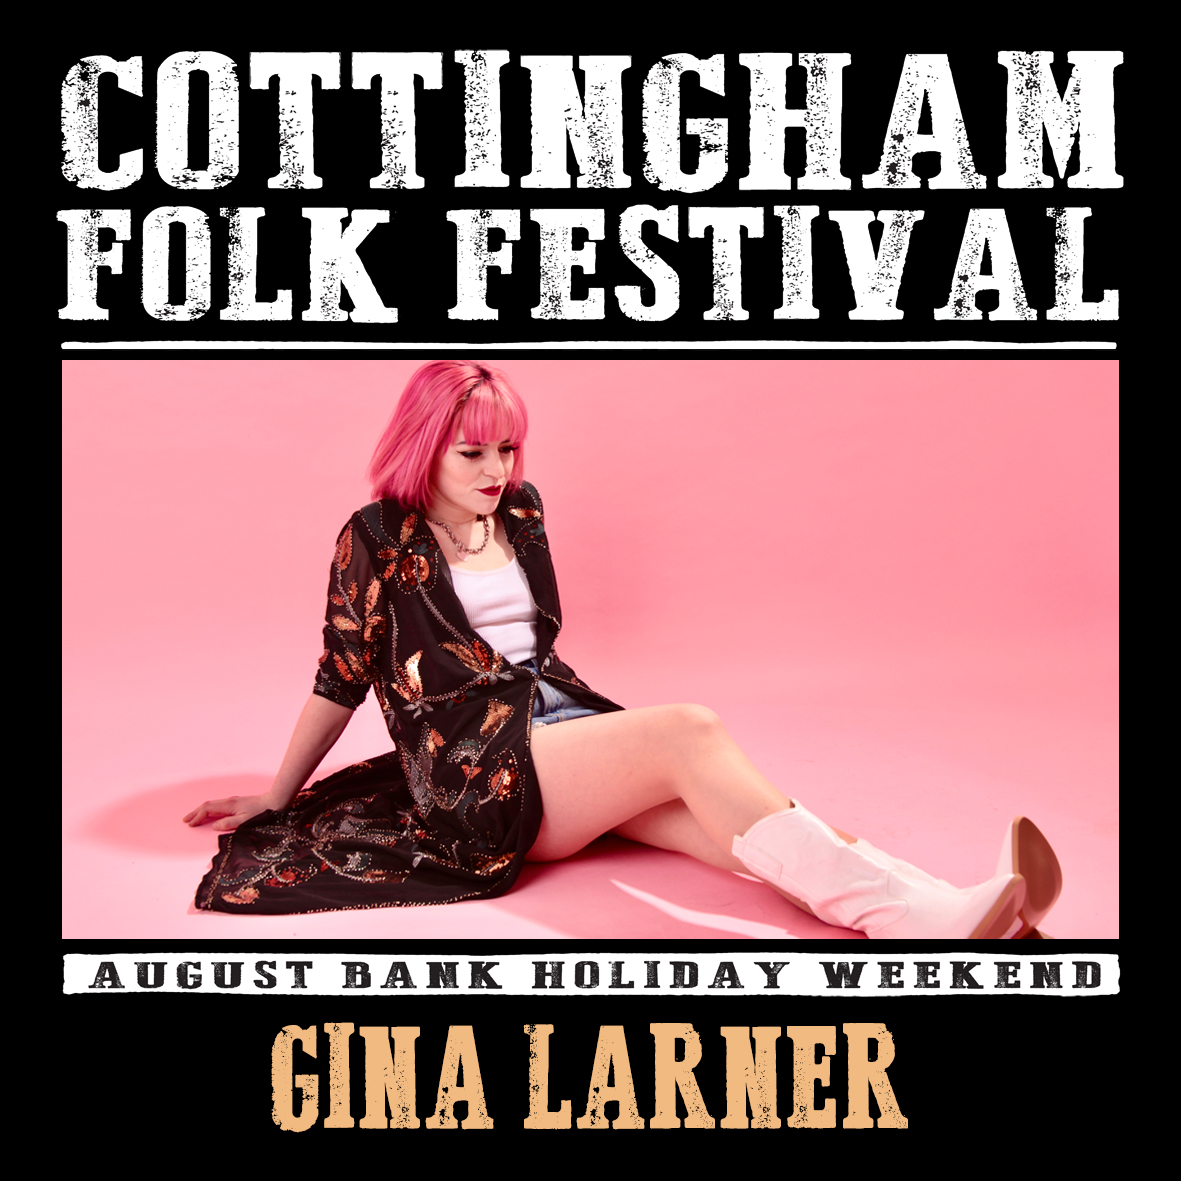 Making a wave in the Americana/Country scene, Gina Larner is a singer/songwriter from Brighton, drawing influences from Fleetwood Mac, Lily Allen and Kasey Musgraves. Gina has opened for the likes of KT Tunstall, Ronan Keating, Ryan Hamilton and Sound of the Sirens.